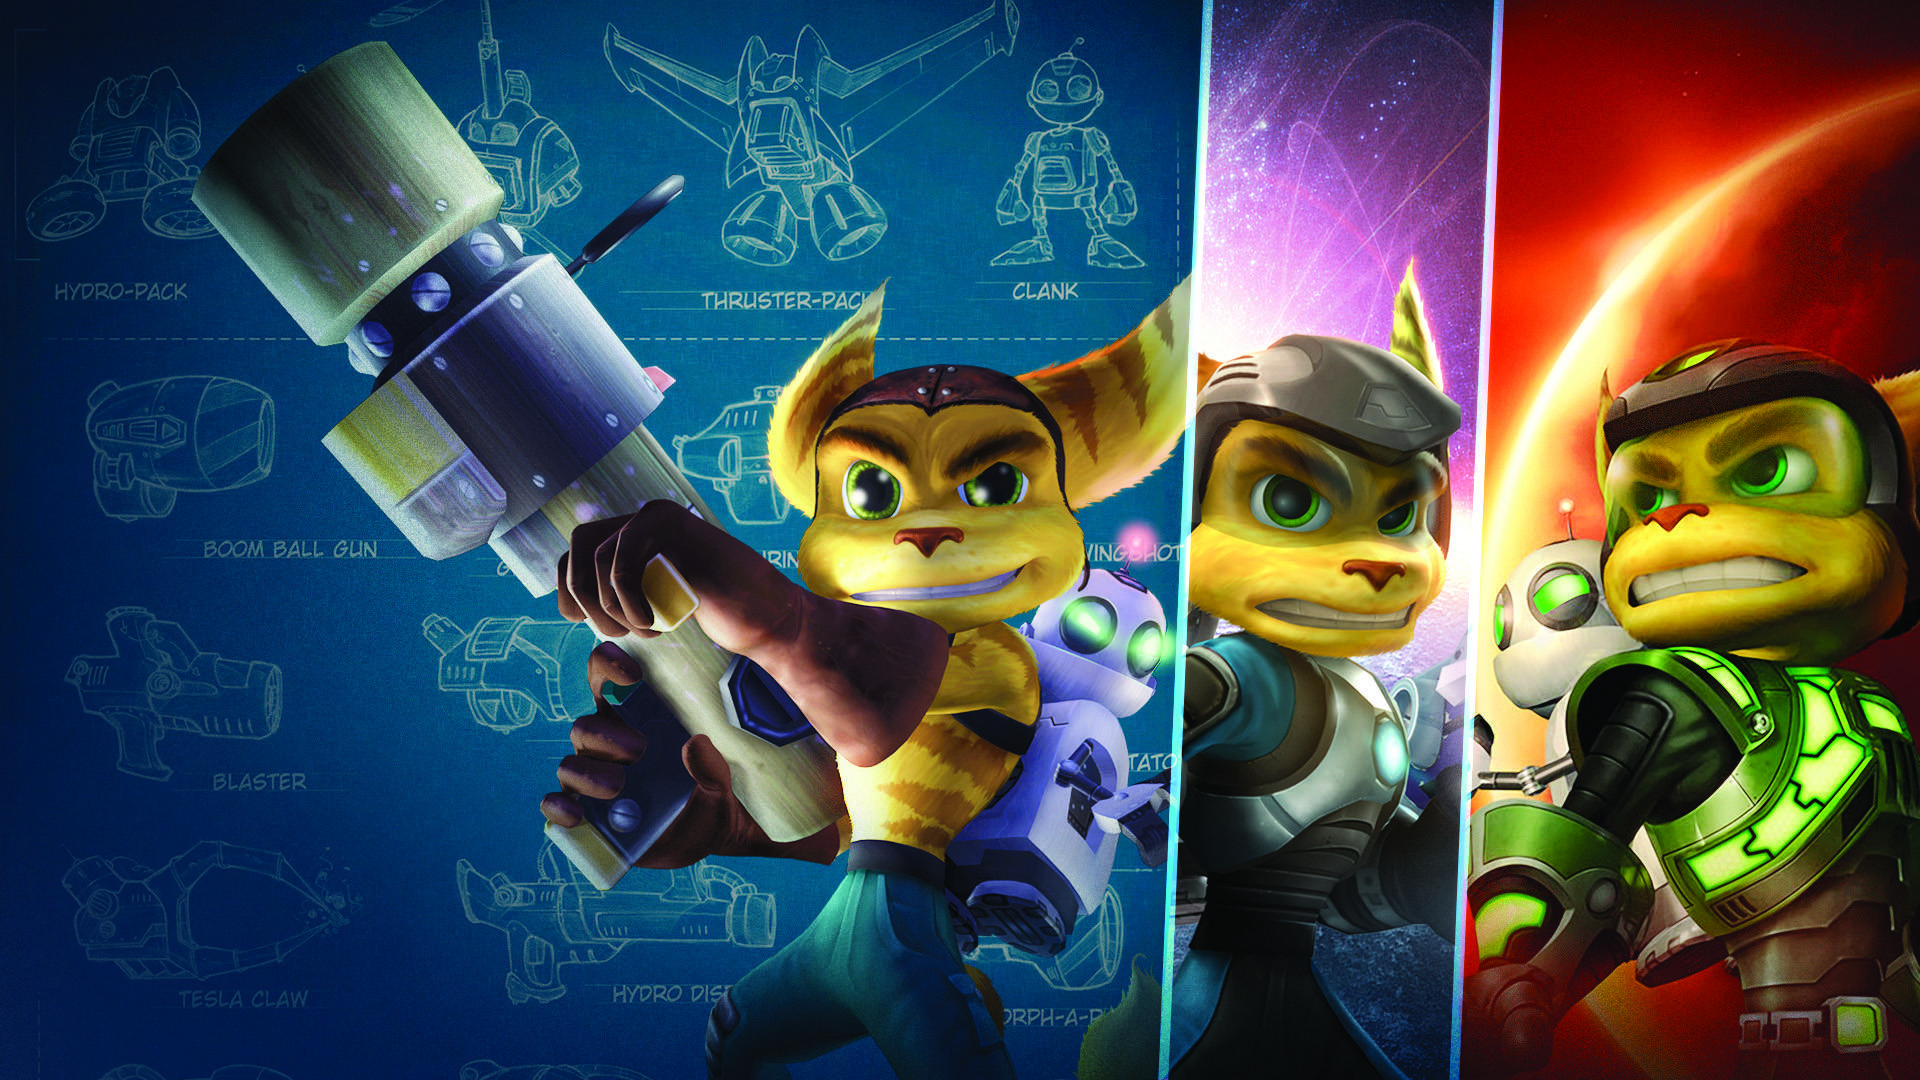 Ratchet &amp; Clank 2021 Wallpapers